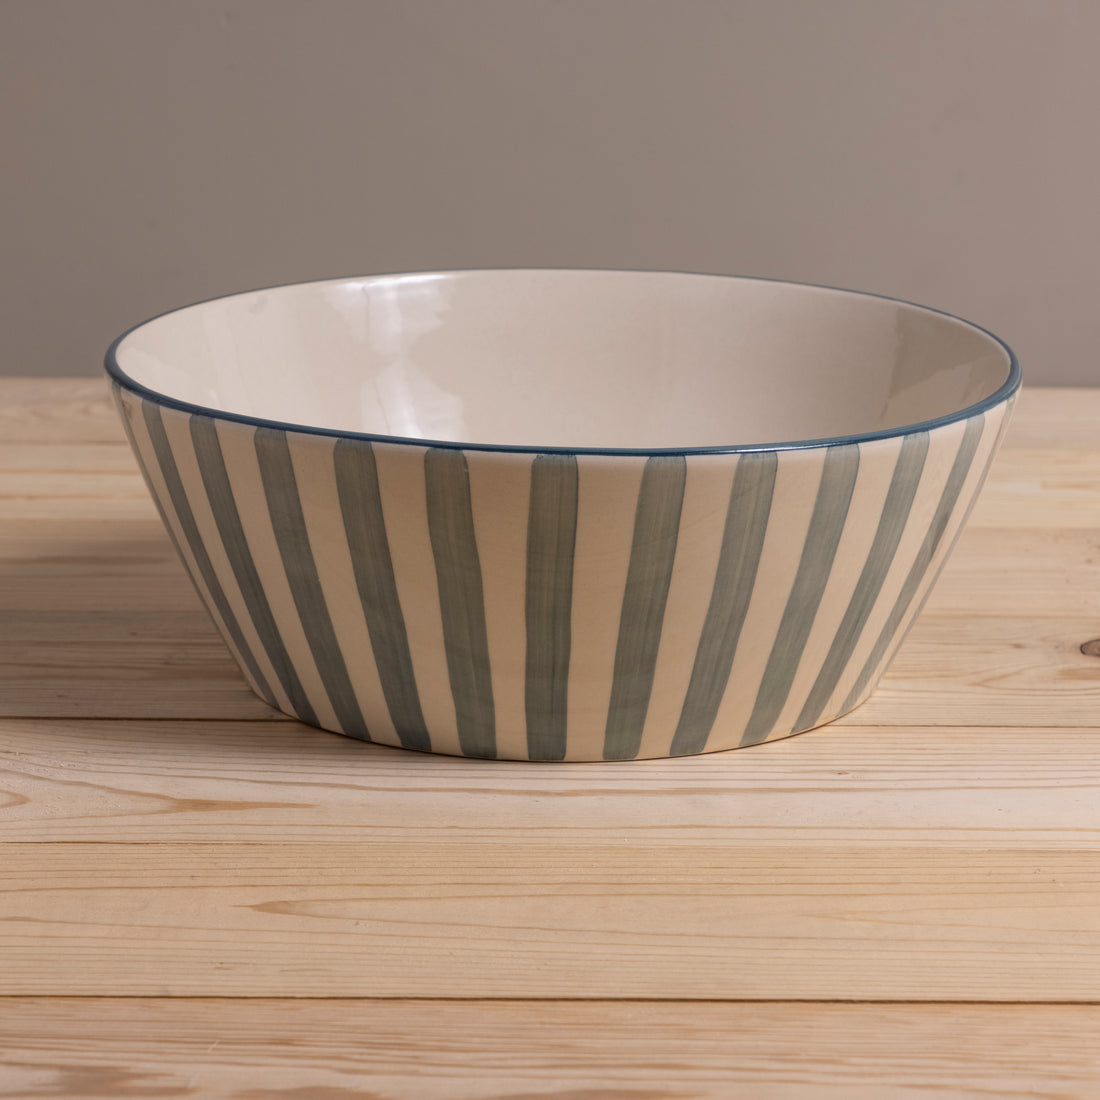 Hand-Painted Stoneware Serving Bowl with Stripes